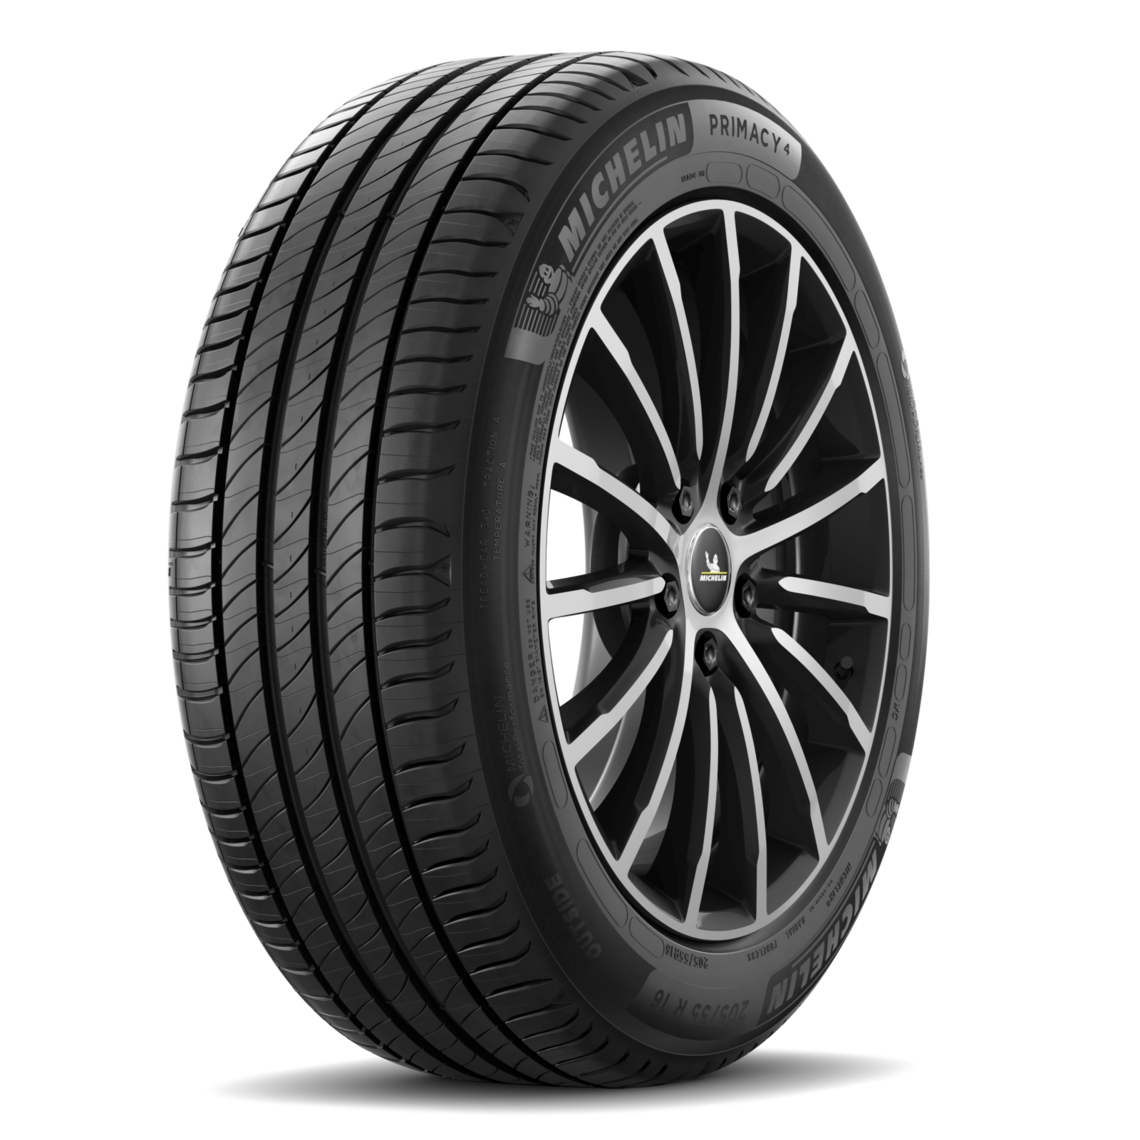 Primacy Reviews Michelin 4 Tests Tyre - and